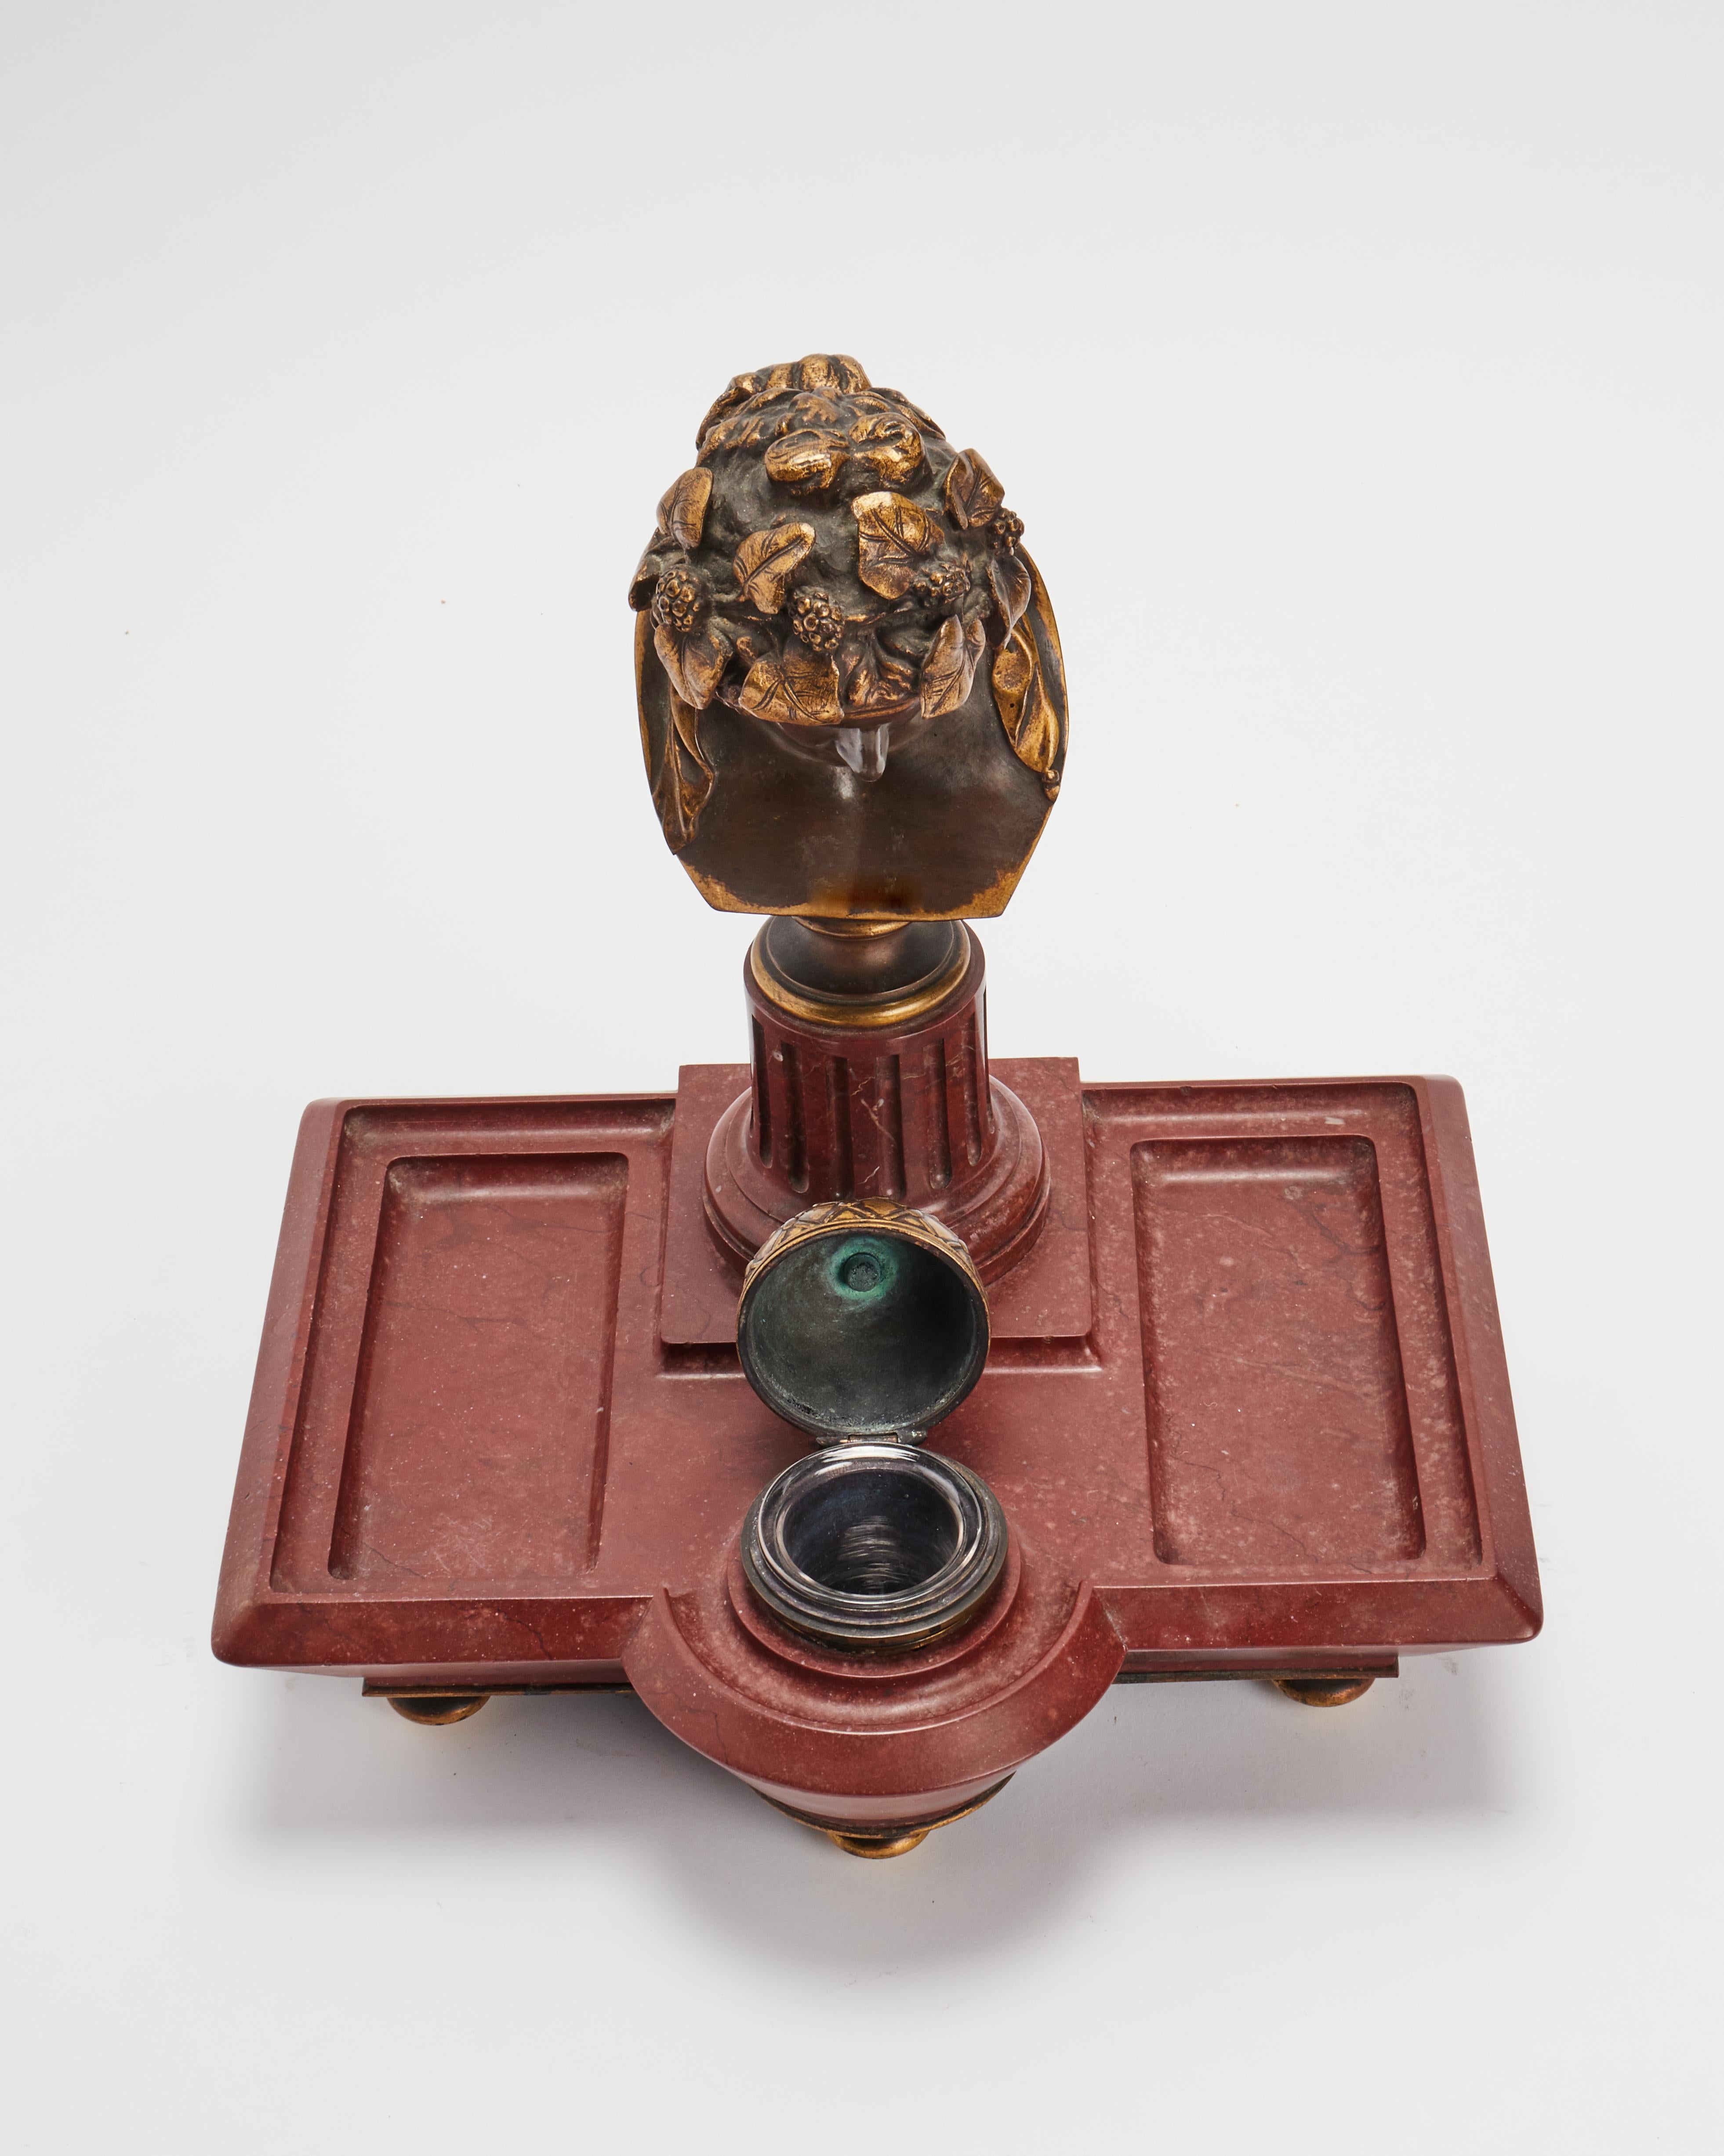 A Verona red marble remarkable inkwell, pure Empire style representing a gilded bronze of the bust of Antinous as Dioniso. Empire style, Generous size, excellent state of preservation.France. Signed by Ferdinand Barbedienne foundry. Paris, France